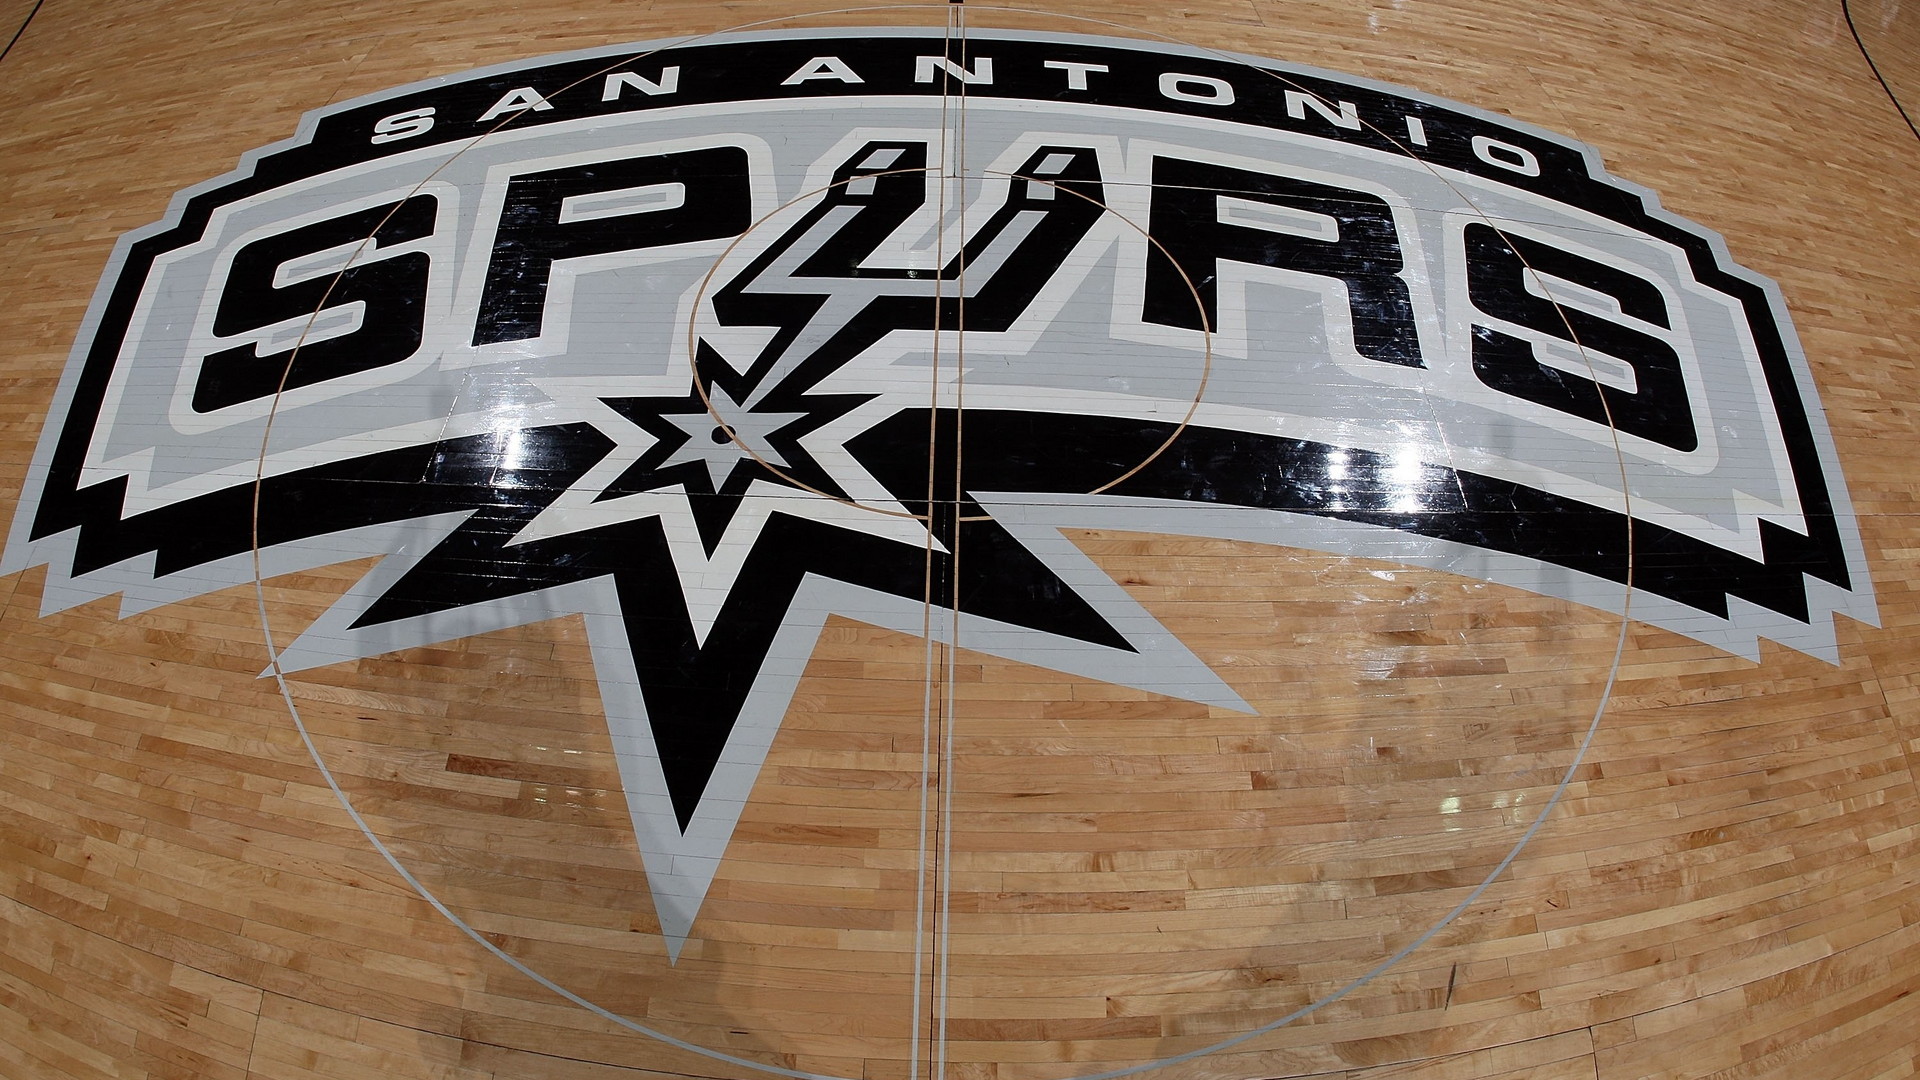 Wallpapers San Antonio Spurs With high-resolution 1920X1080 pixel. You can use this wallpaper for your Desktop Computer Backgrounds, Windows or Mac Screensavers, iPhone Lock screen, Tablet or Android and another Mobile Phone device